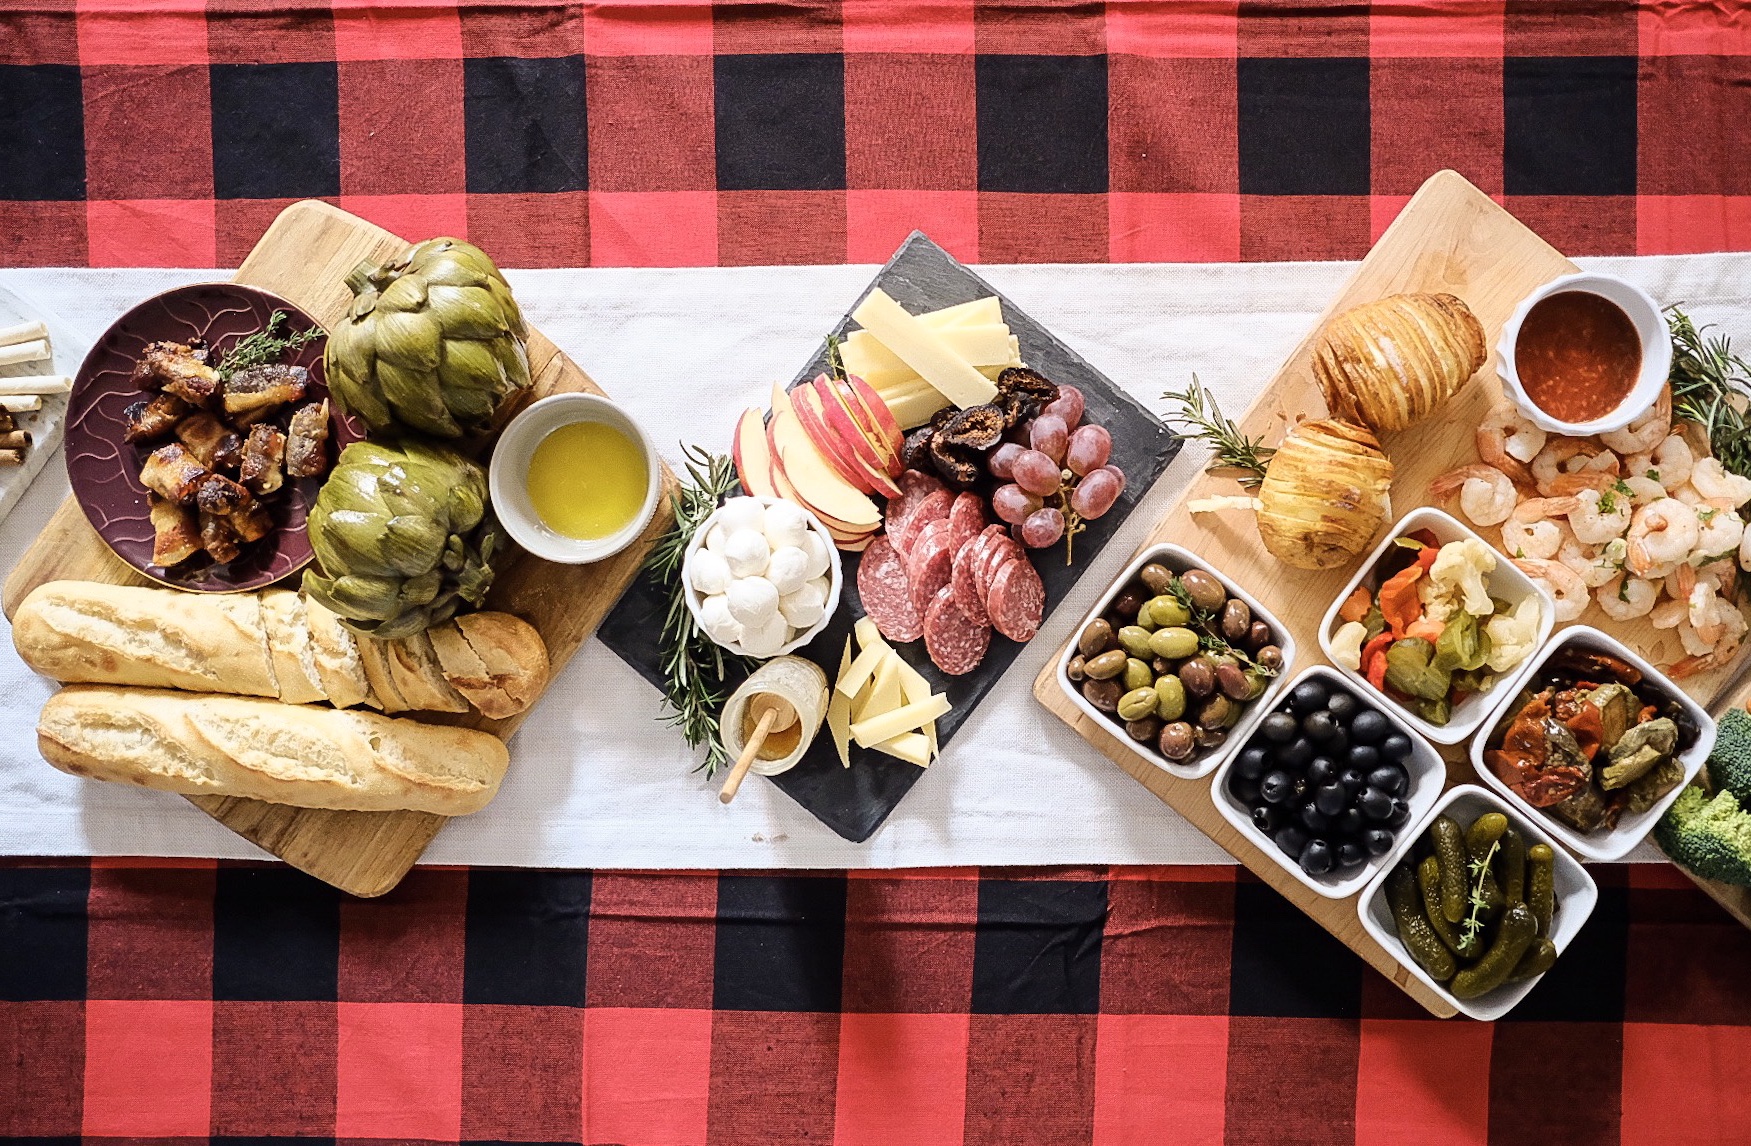 Chocolate and Lace shares her tips on how to build the best Charcuterie Board. 